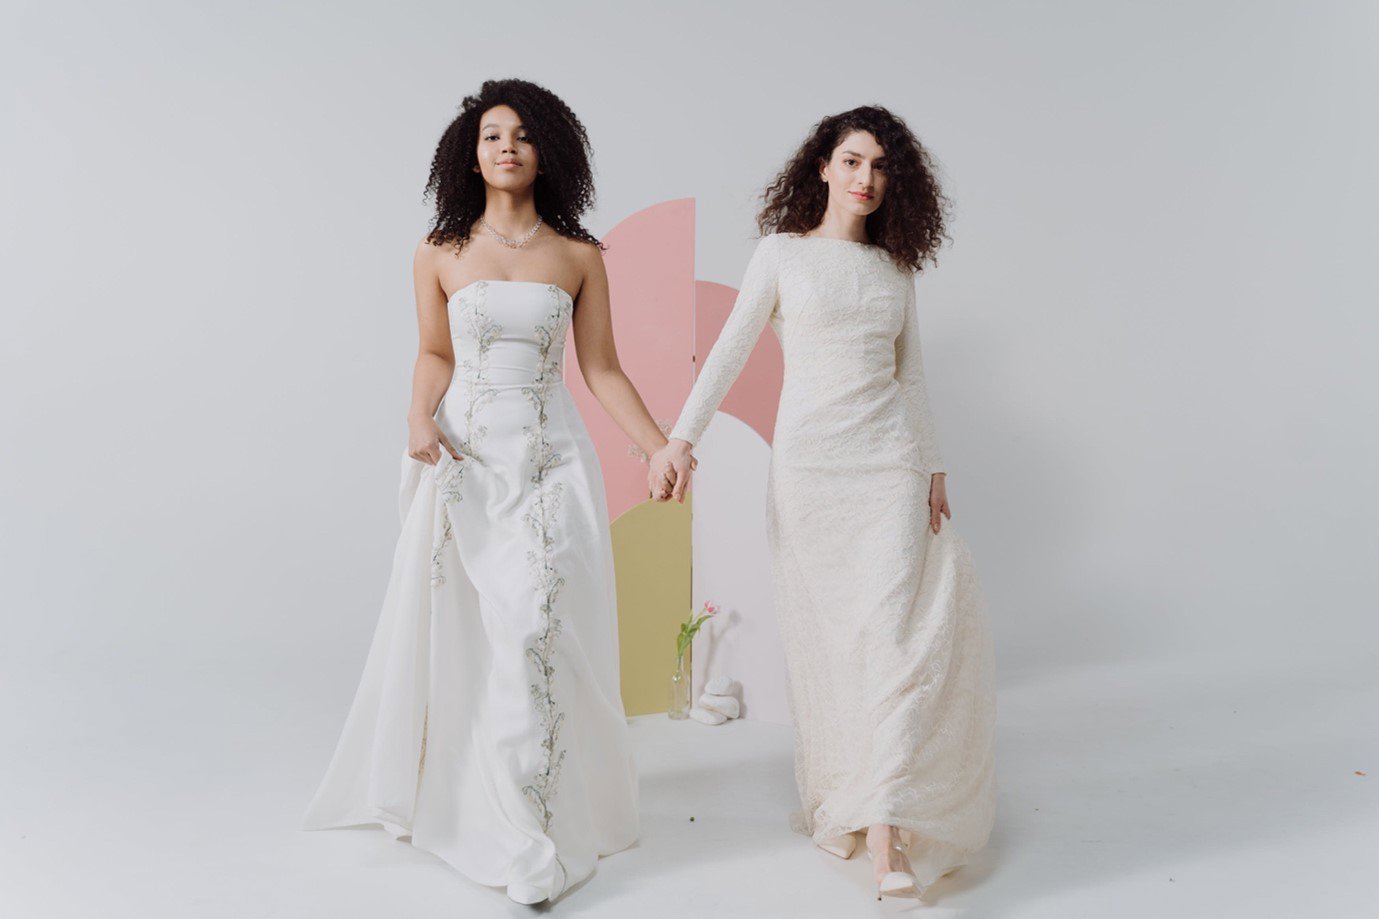 two women in wedding dresses holding hands